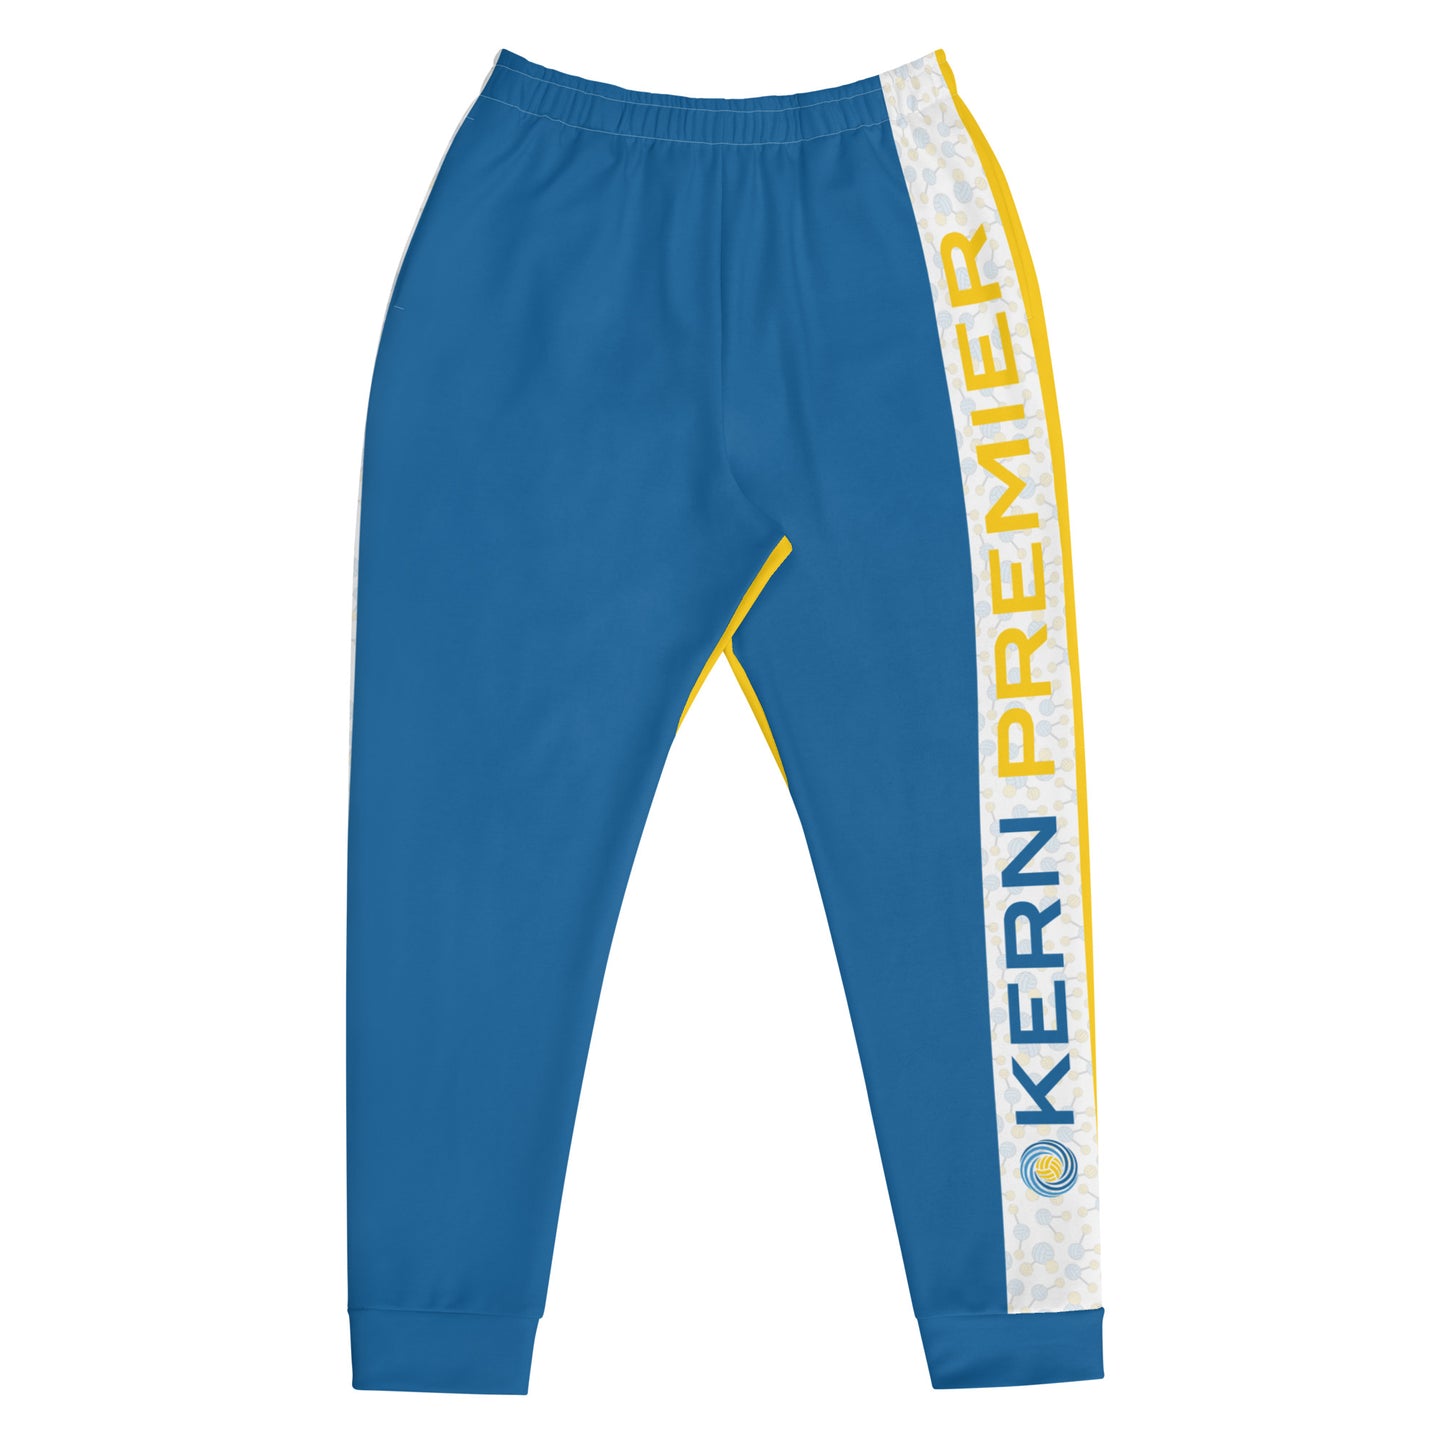 Kern Premier - Blue and Gold with H20 Waterpolo Molecule Stripe and Logo - Joggers